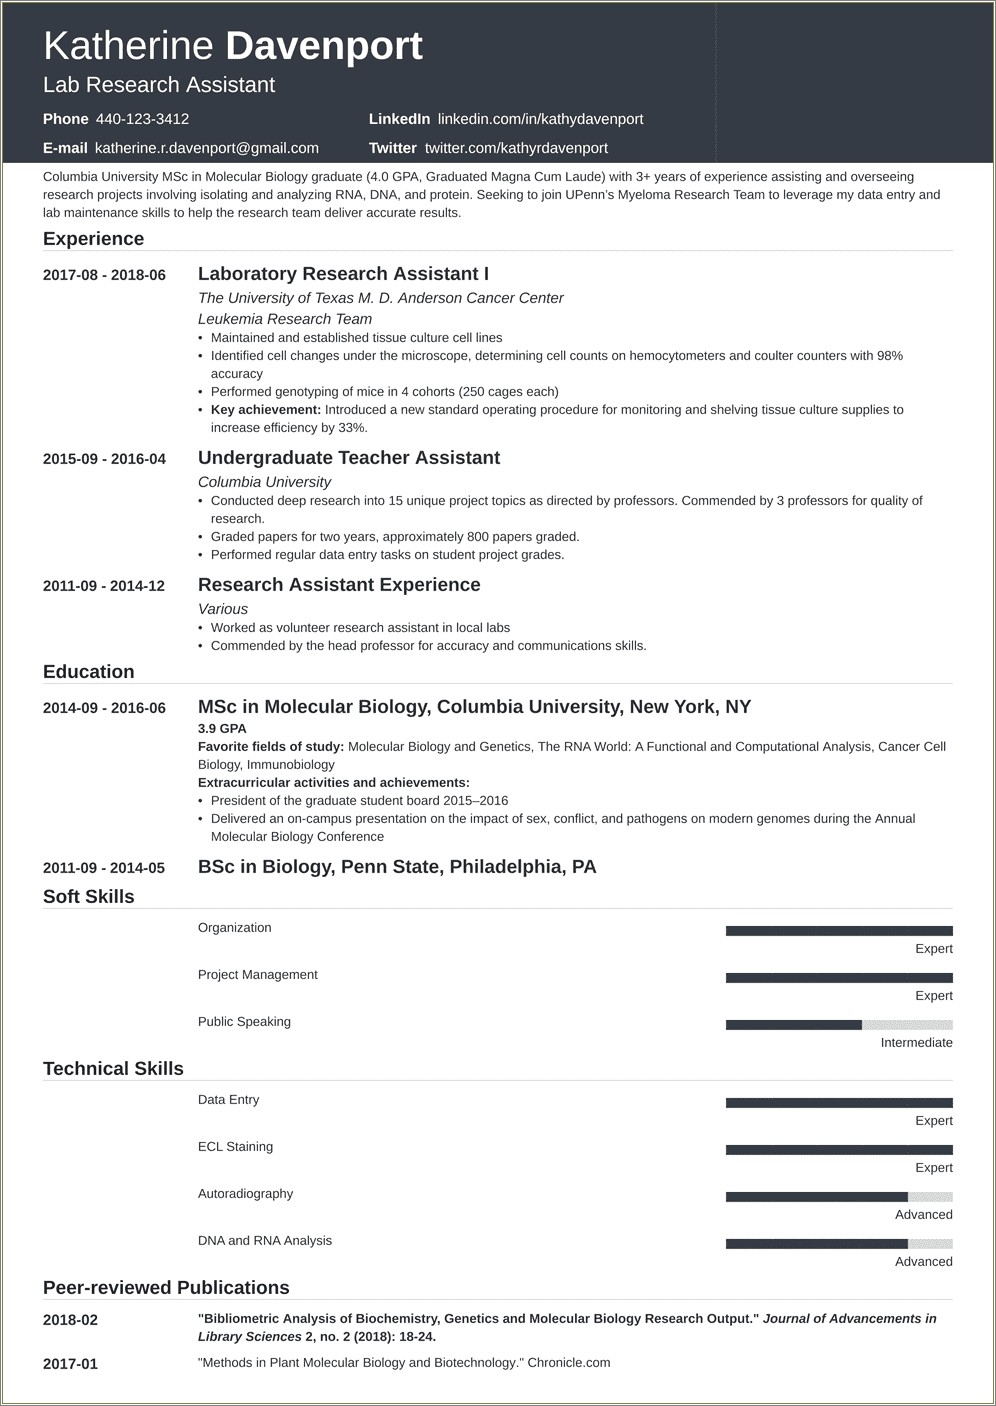 Sample Resume Profiles For Research Assistants